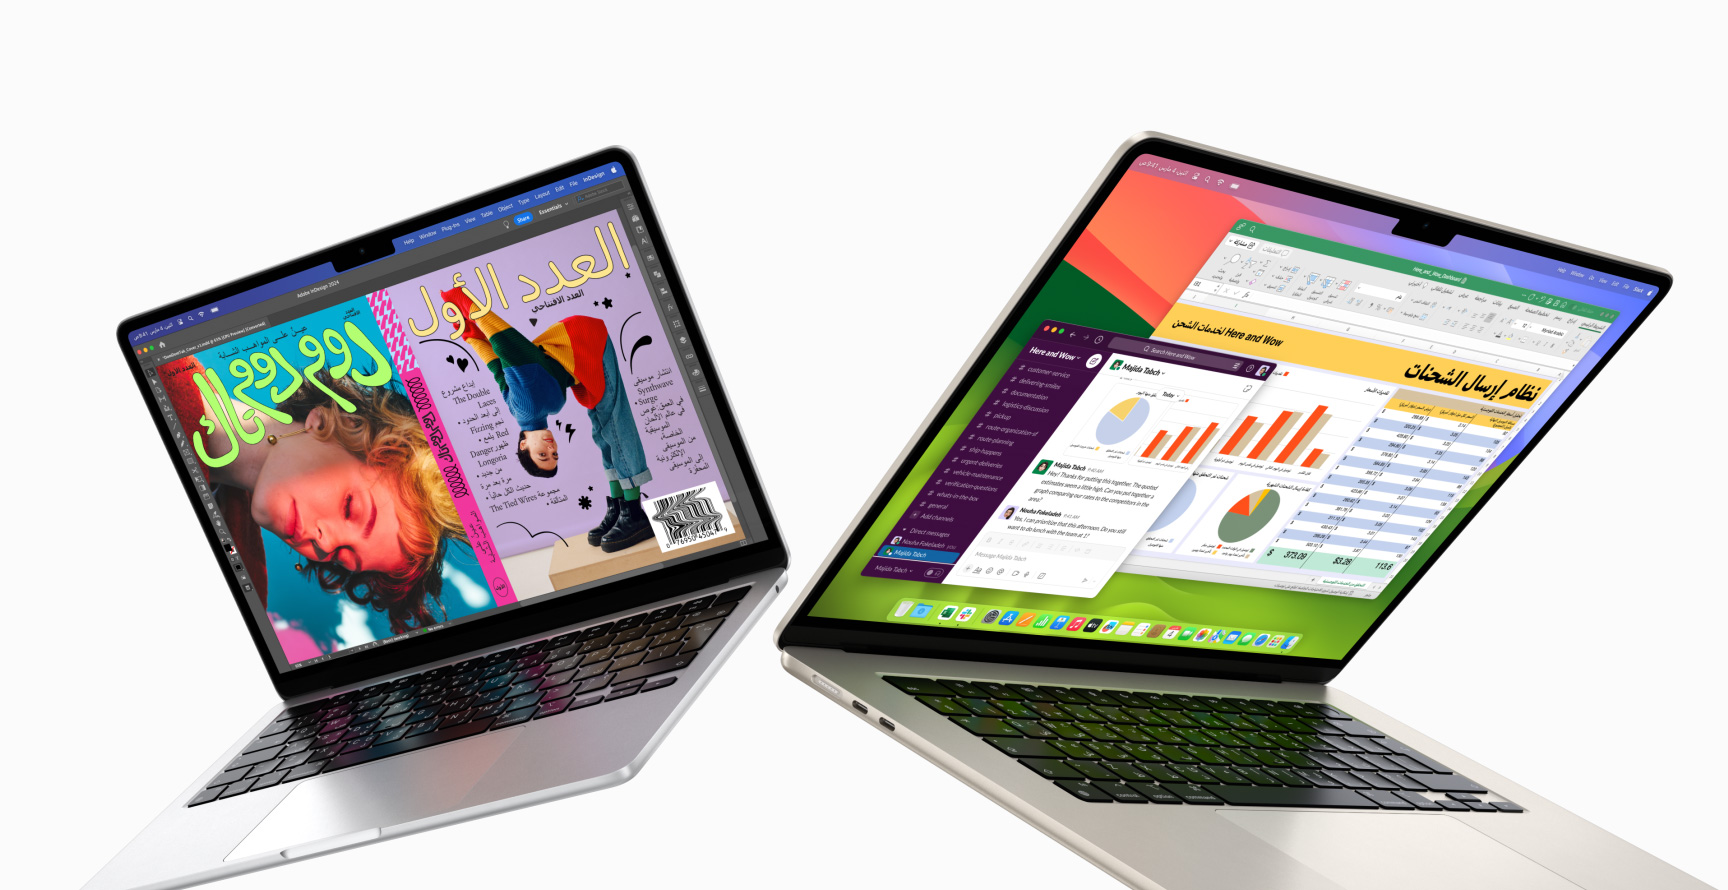 Partially open 13-inch MacBook Air on left and 15-inch MacBook Air on right. 13-inch screen shows colorful ‘zine cover created with In Design. 15-inch screen shows Microsoft Excel and Slack.